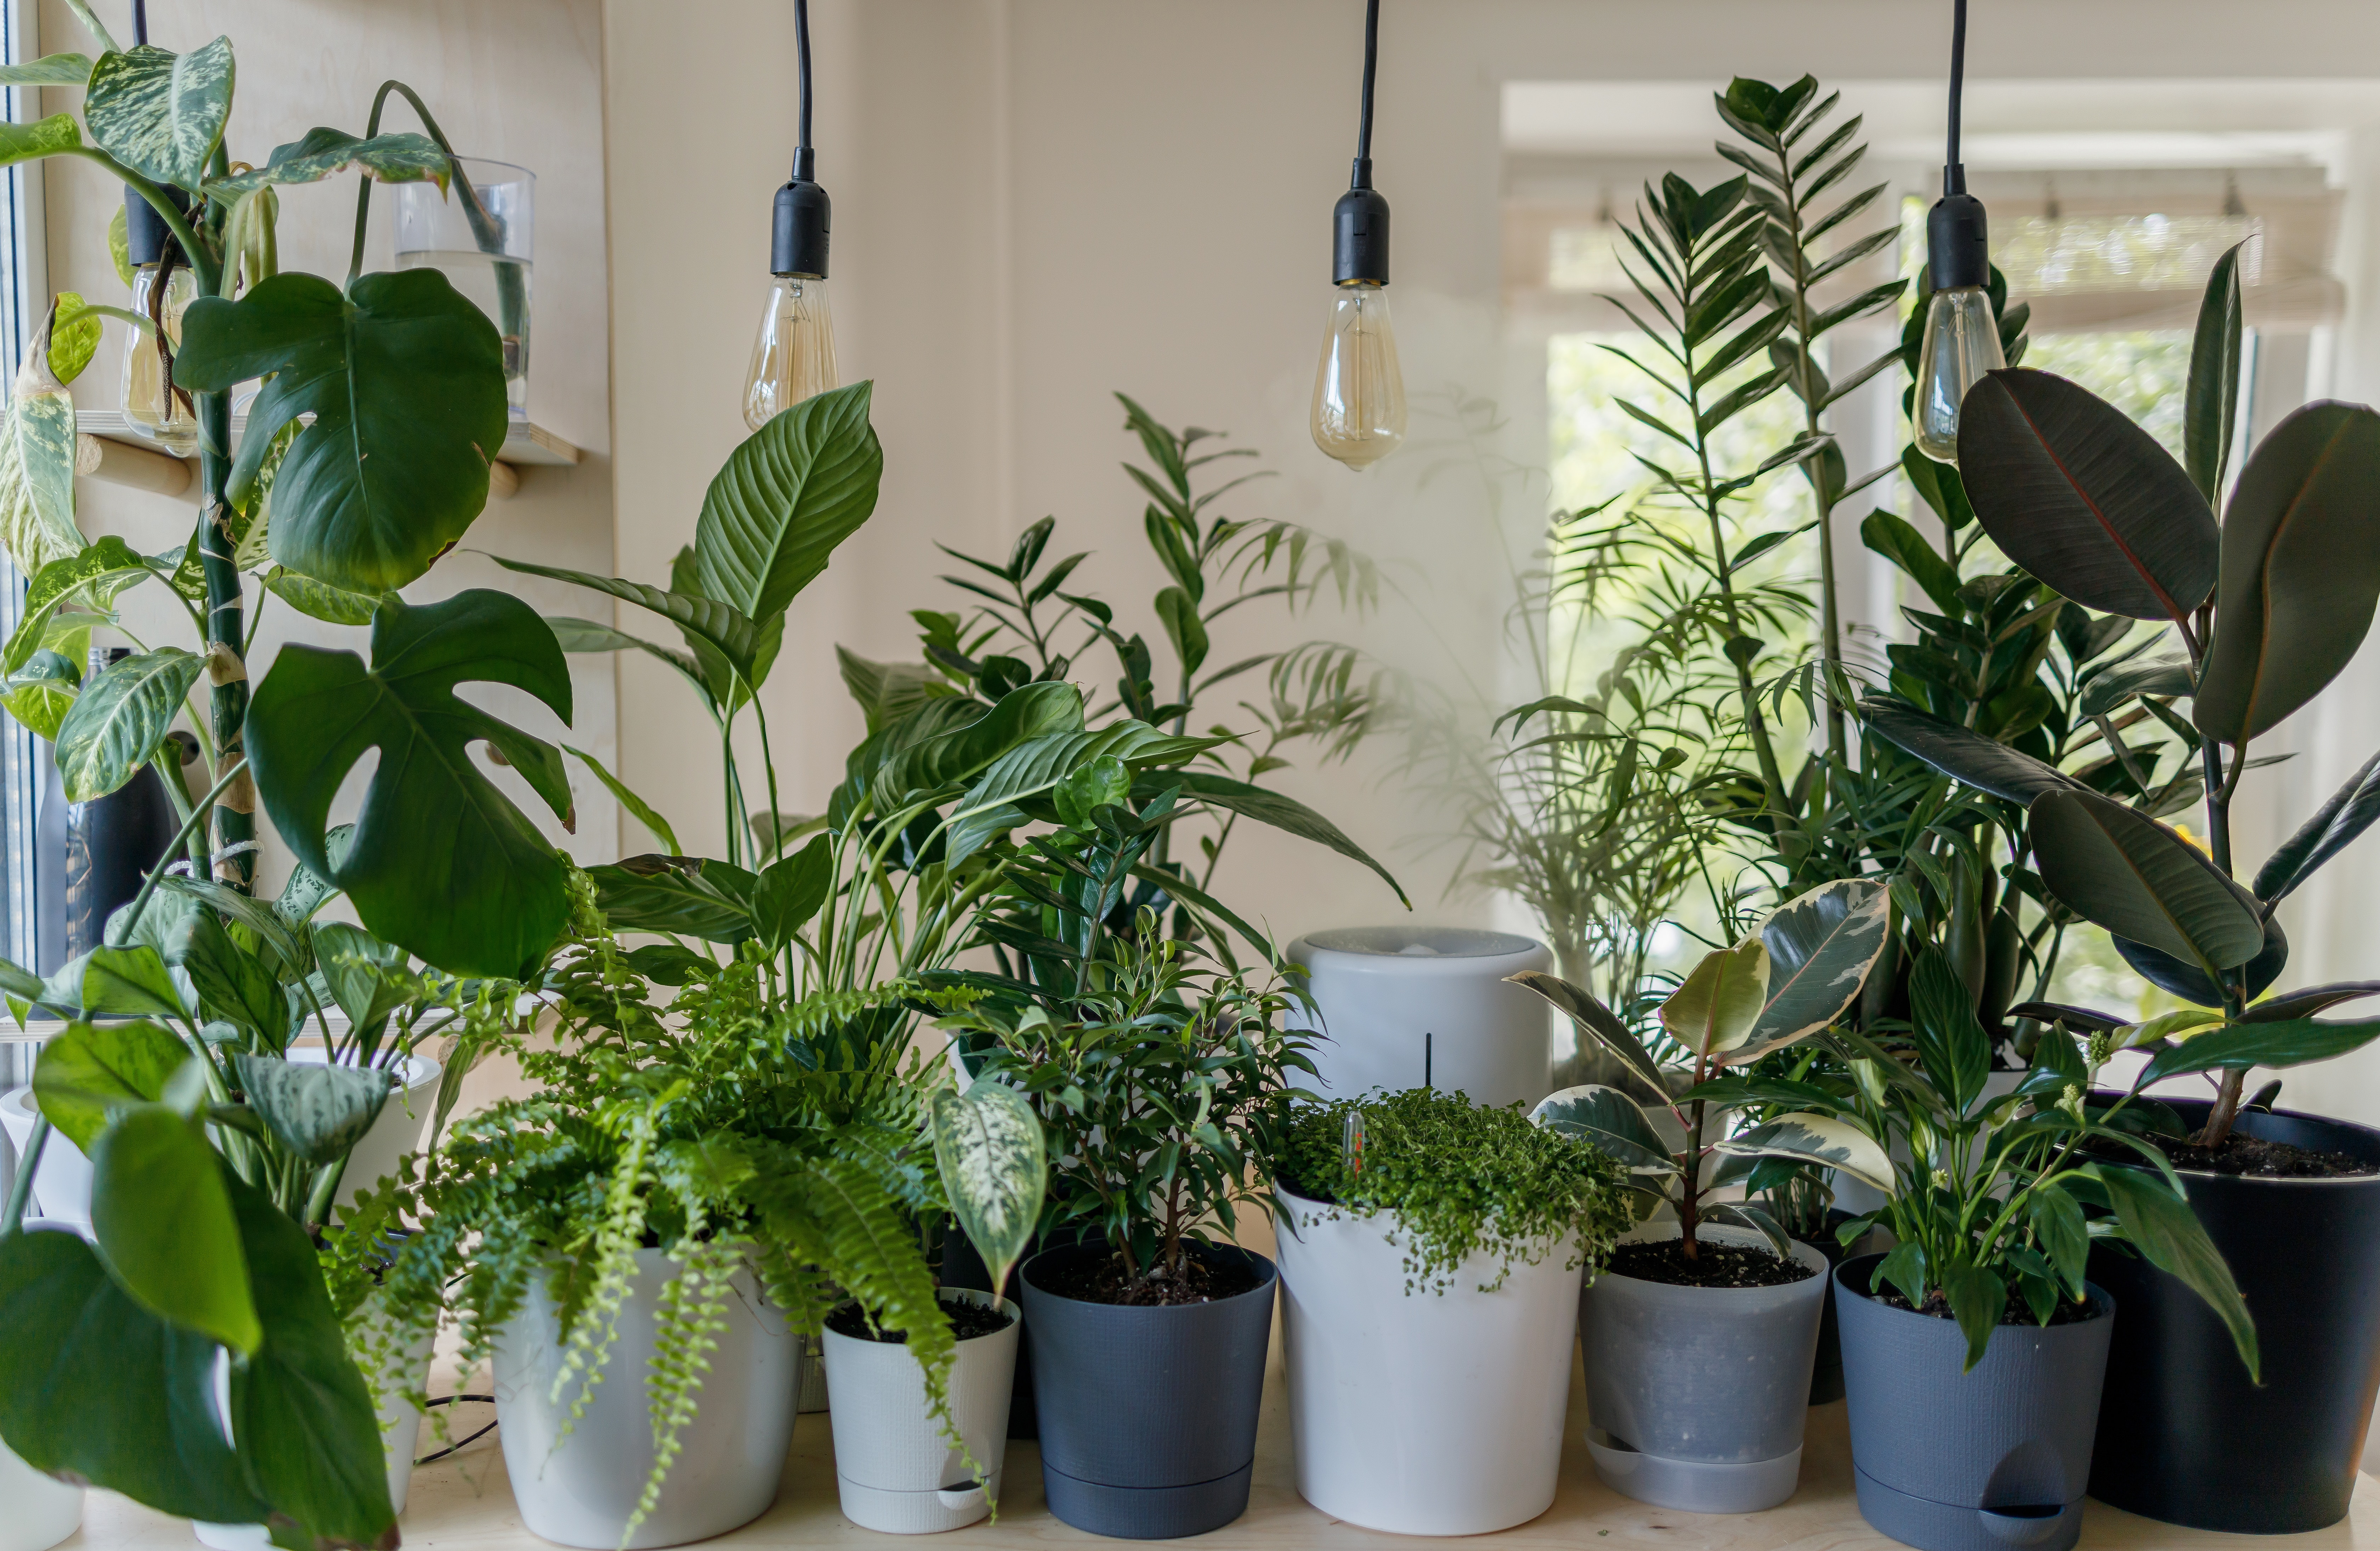 10 Low Maintenance Houseplants for Air Purification